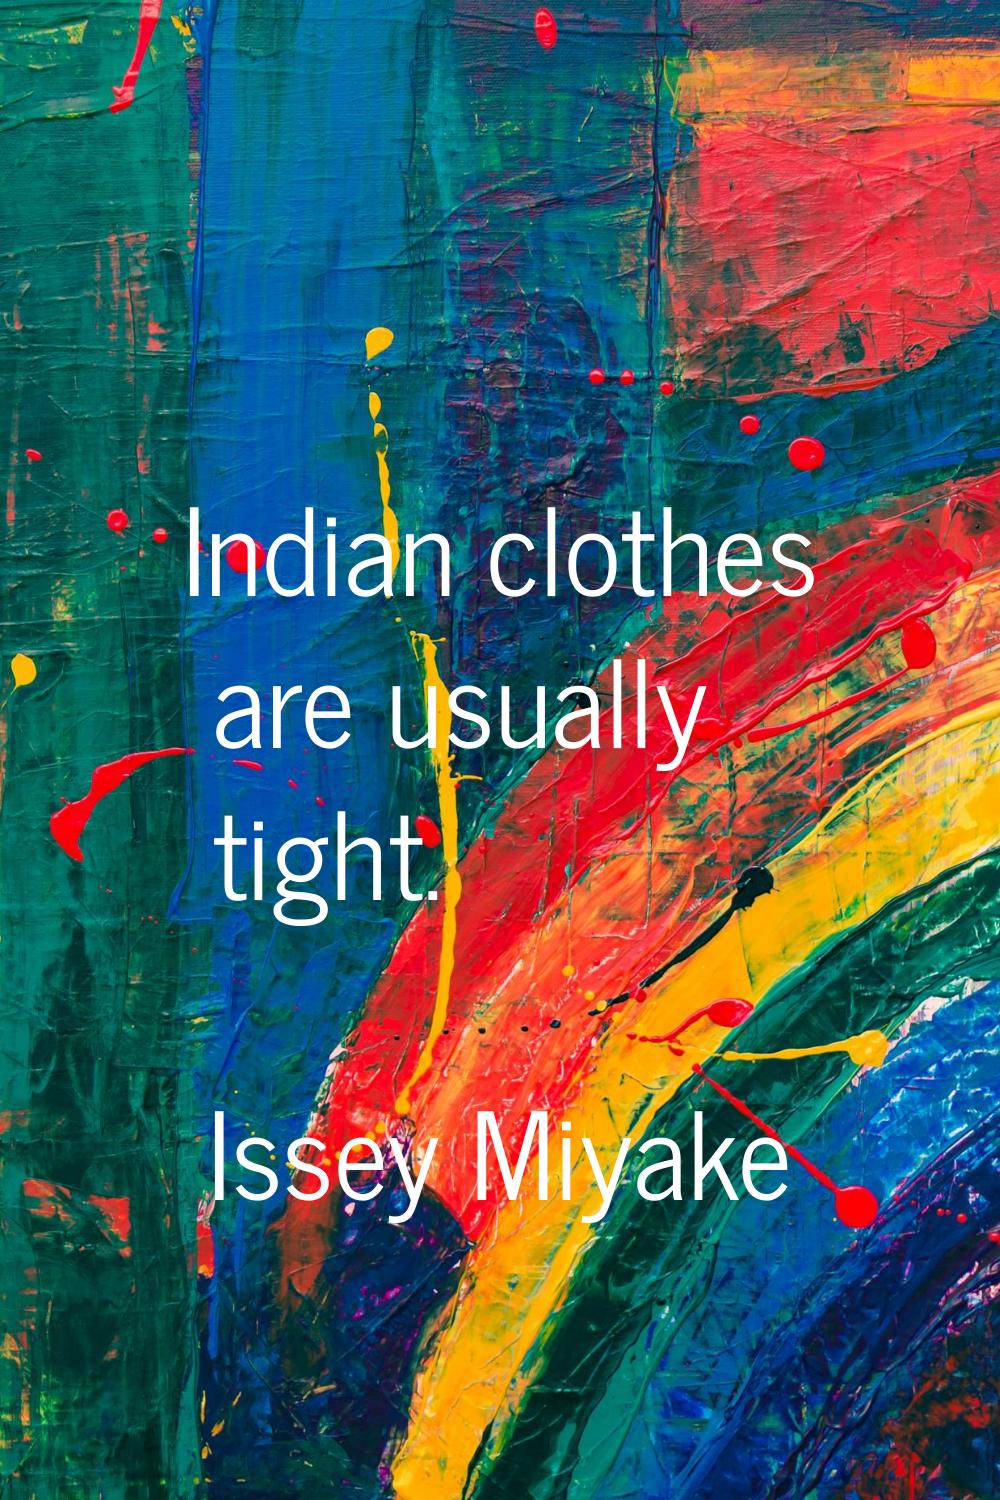 Indian clothes are usually tight.